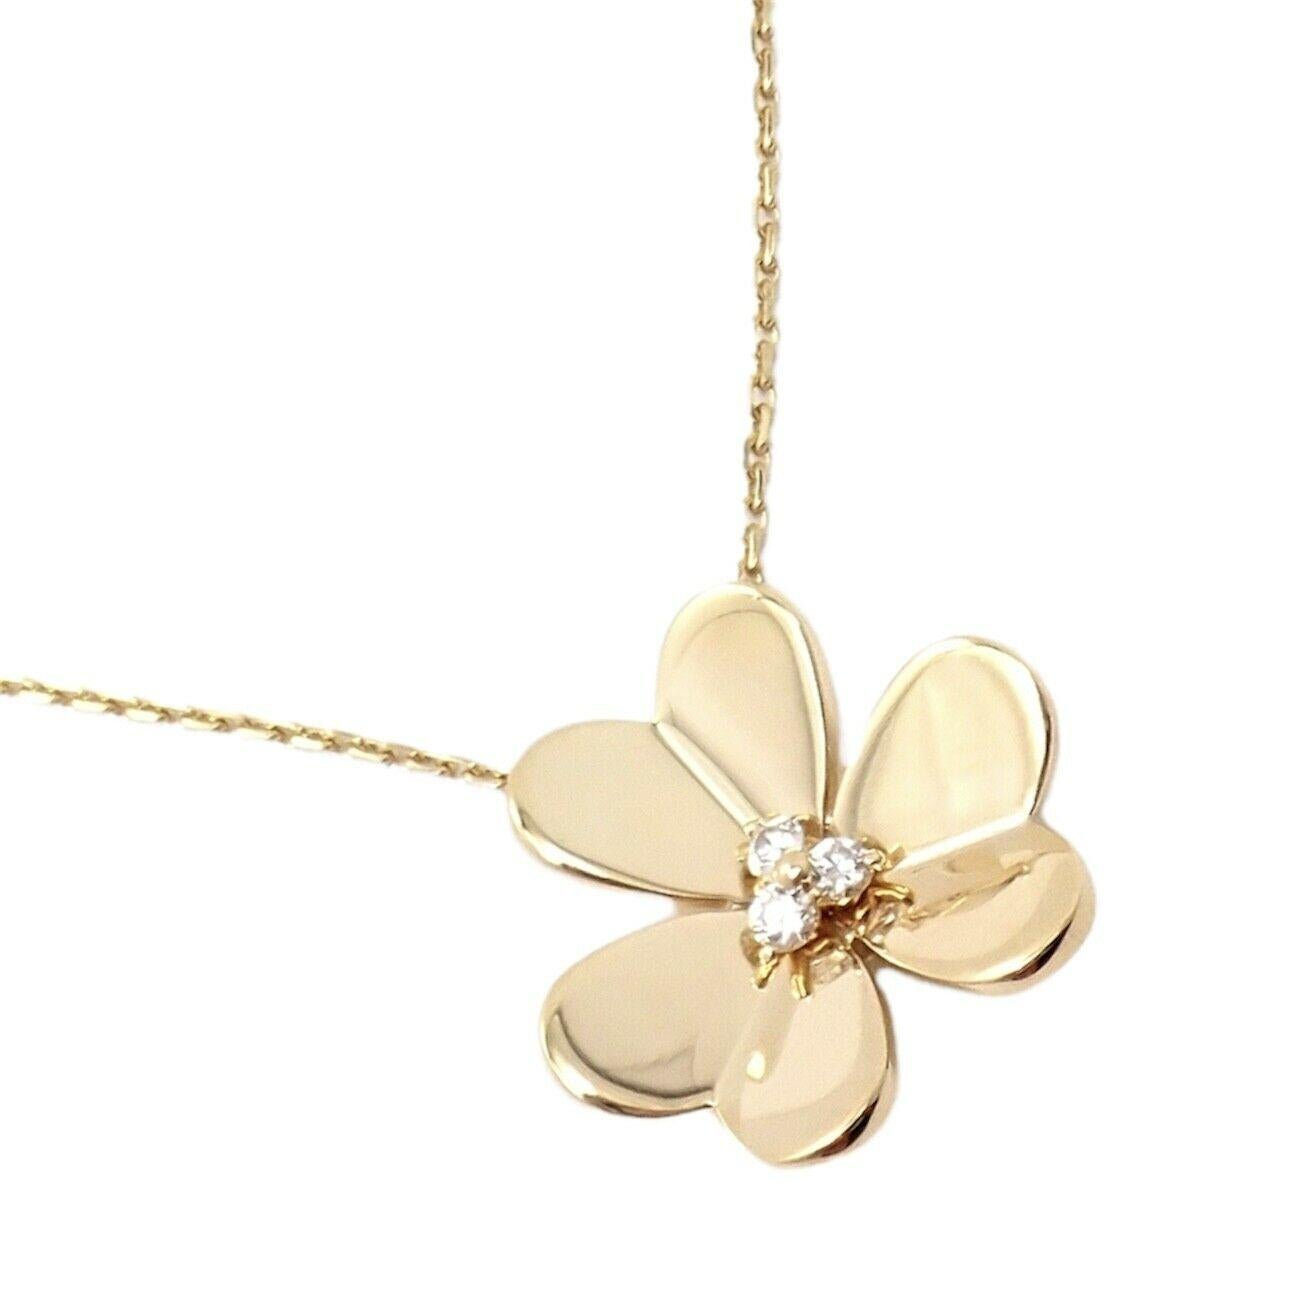 18k Yellow Gold Diamond Frivole Flower Pendant Necklace by Van Cleef & Arpels.
With 3 brilliant round cut diamond VVS1 clarity, E colortotal weight approximately .15ct
Details:
Measurements: 20mm x 22.5mm
Length:16.5